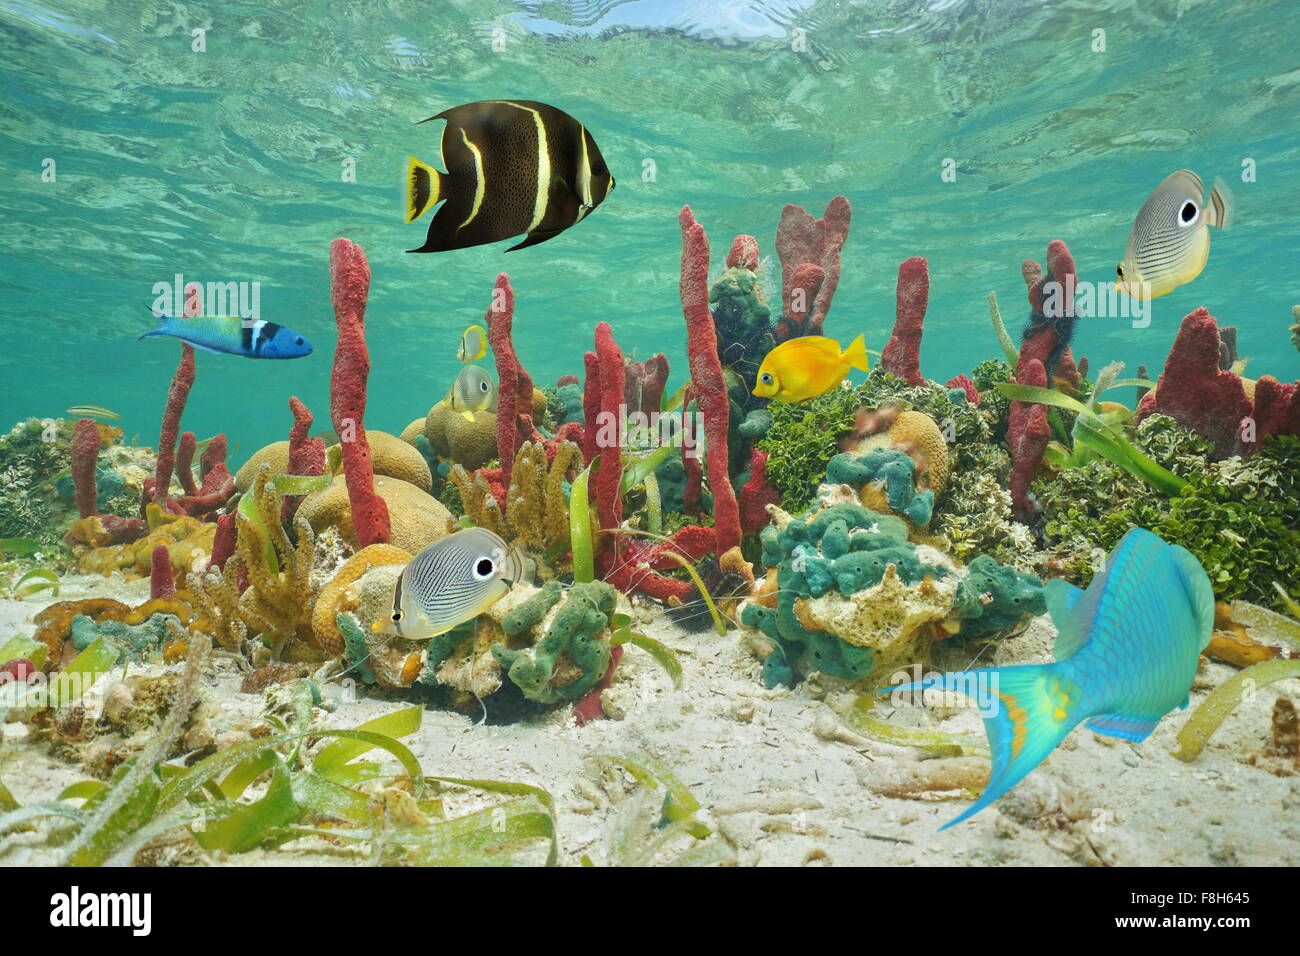 Colorful tropical fish and marine life underwater on a coral reef of the Caribbean sea Stock Photo